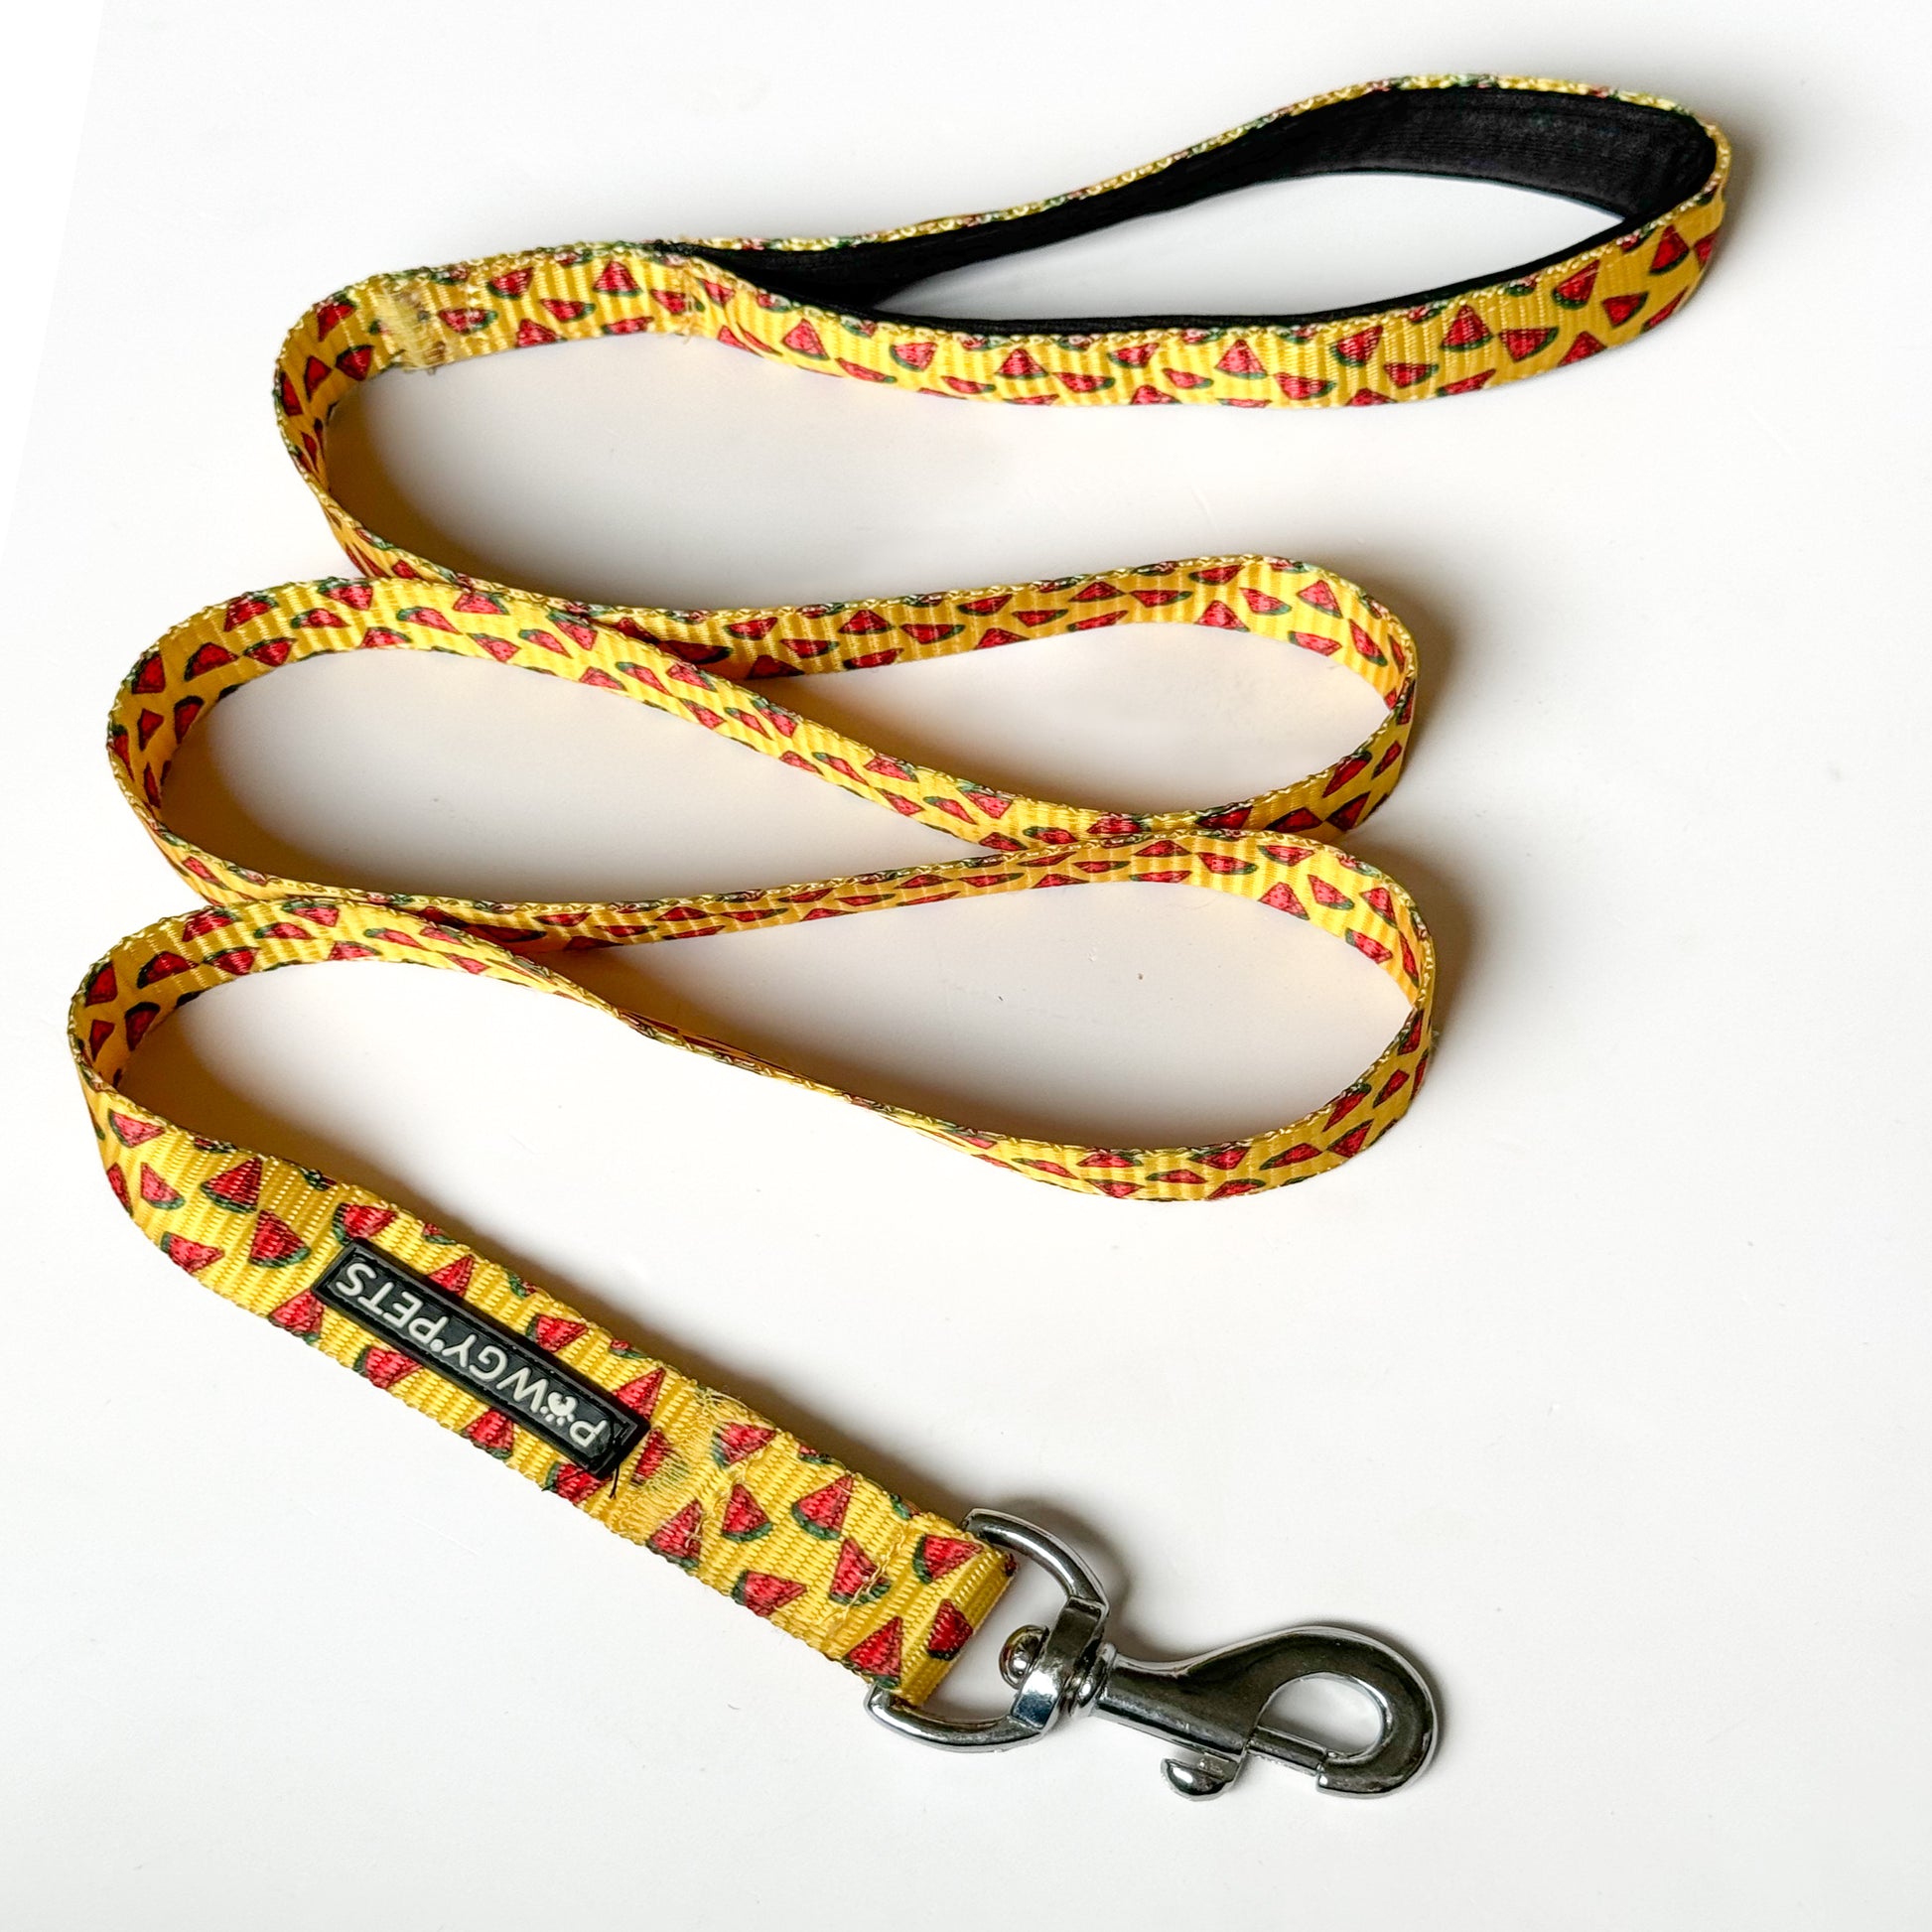 Pawgy Pets Premium Leash: Watermelon Yellow for Dogs and Cats